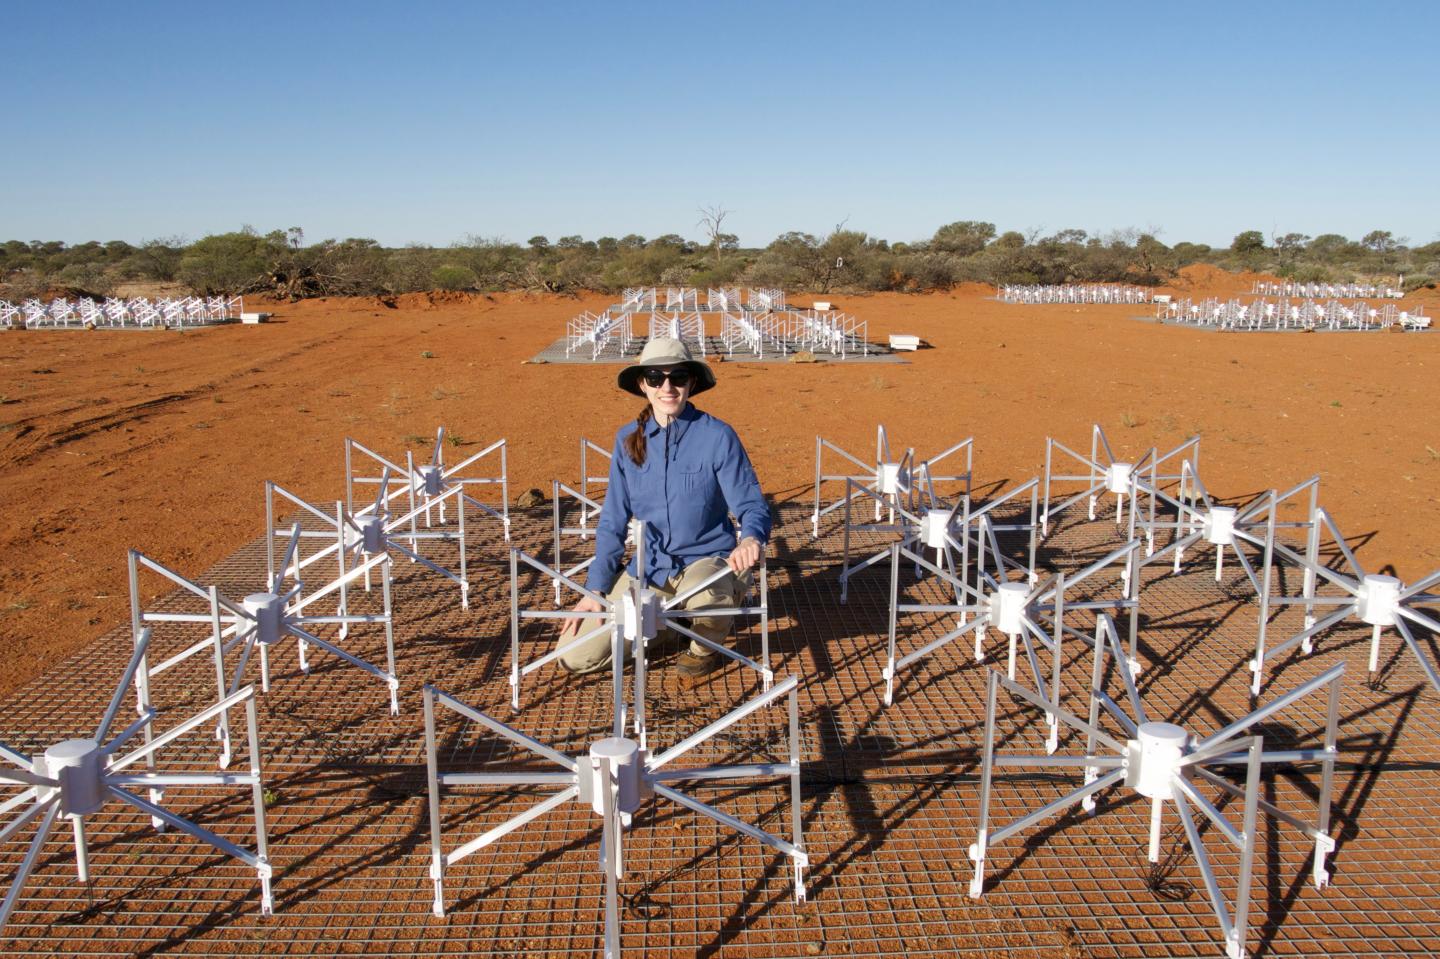 Dr Nichole Barry at The Murchison Widefield Array (MWA)